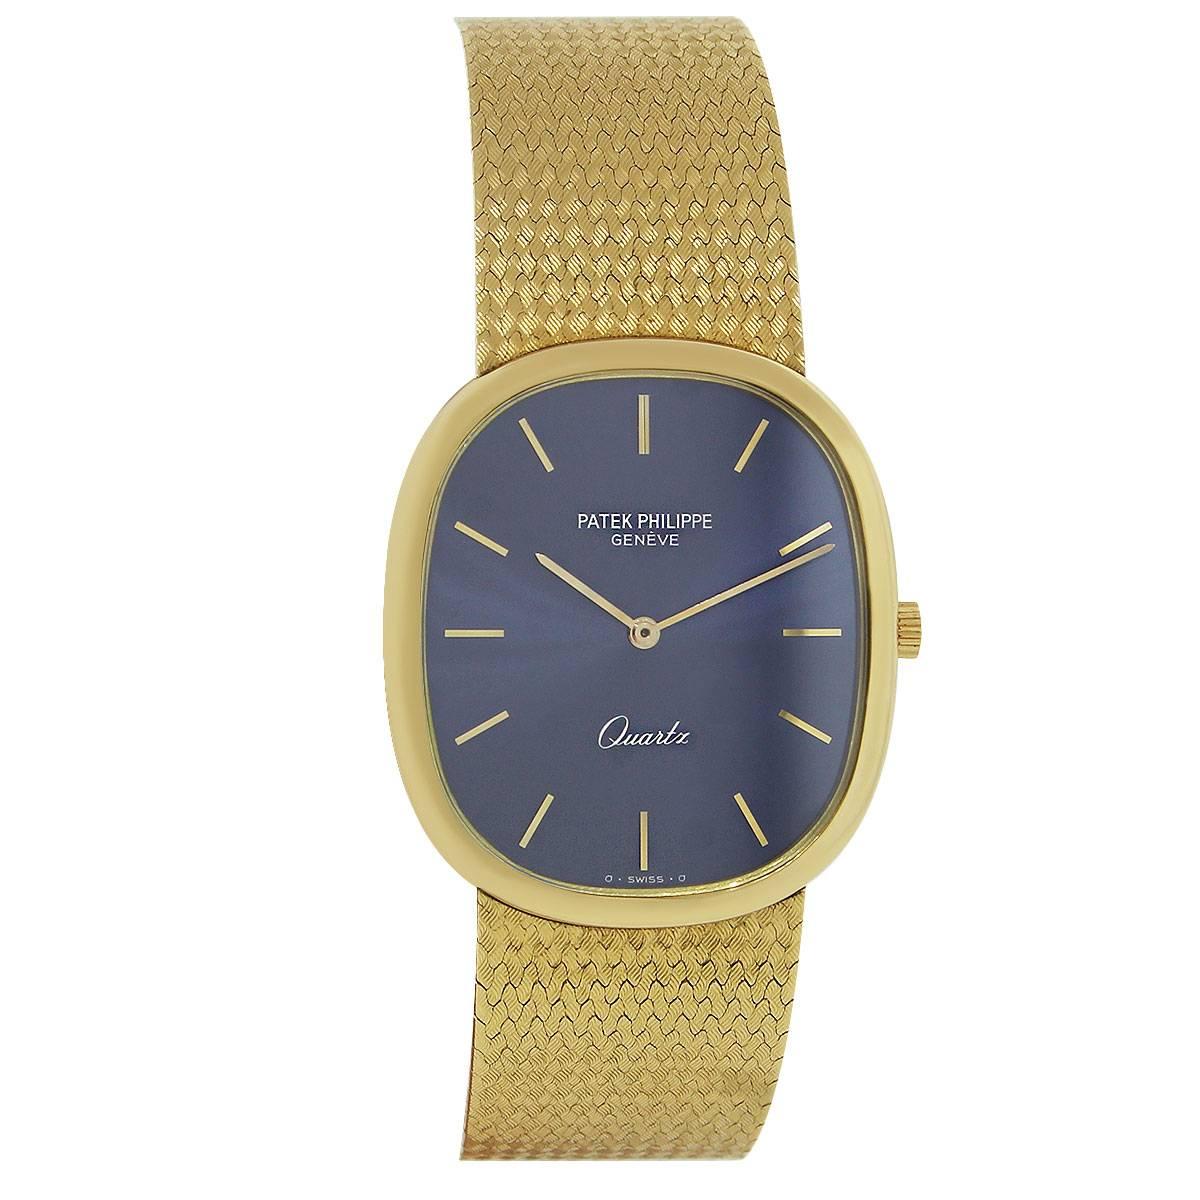 Brand: Patek Philippe
Model Number: 3838/005
Case Measurement: 30mm x 35mm
Case Material: 18k Yellow Gold
Dial: Blue dial with yellow gold stick hour markers.
Bracelet: 18k yellow gold bracelet
Clasp: Hidden Deployment Clasp
Crystal: